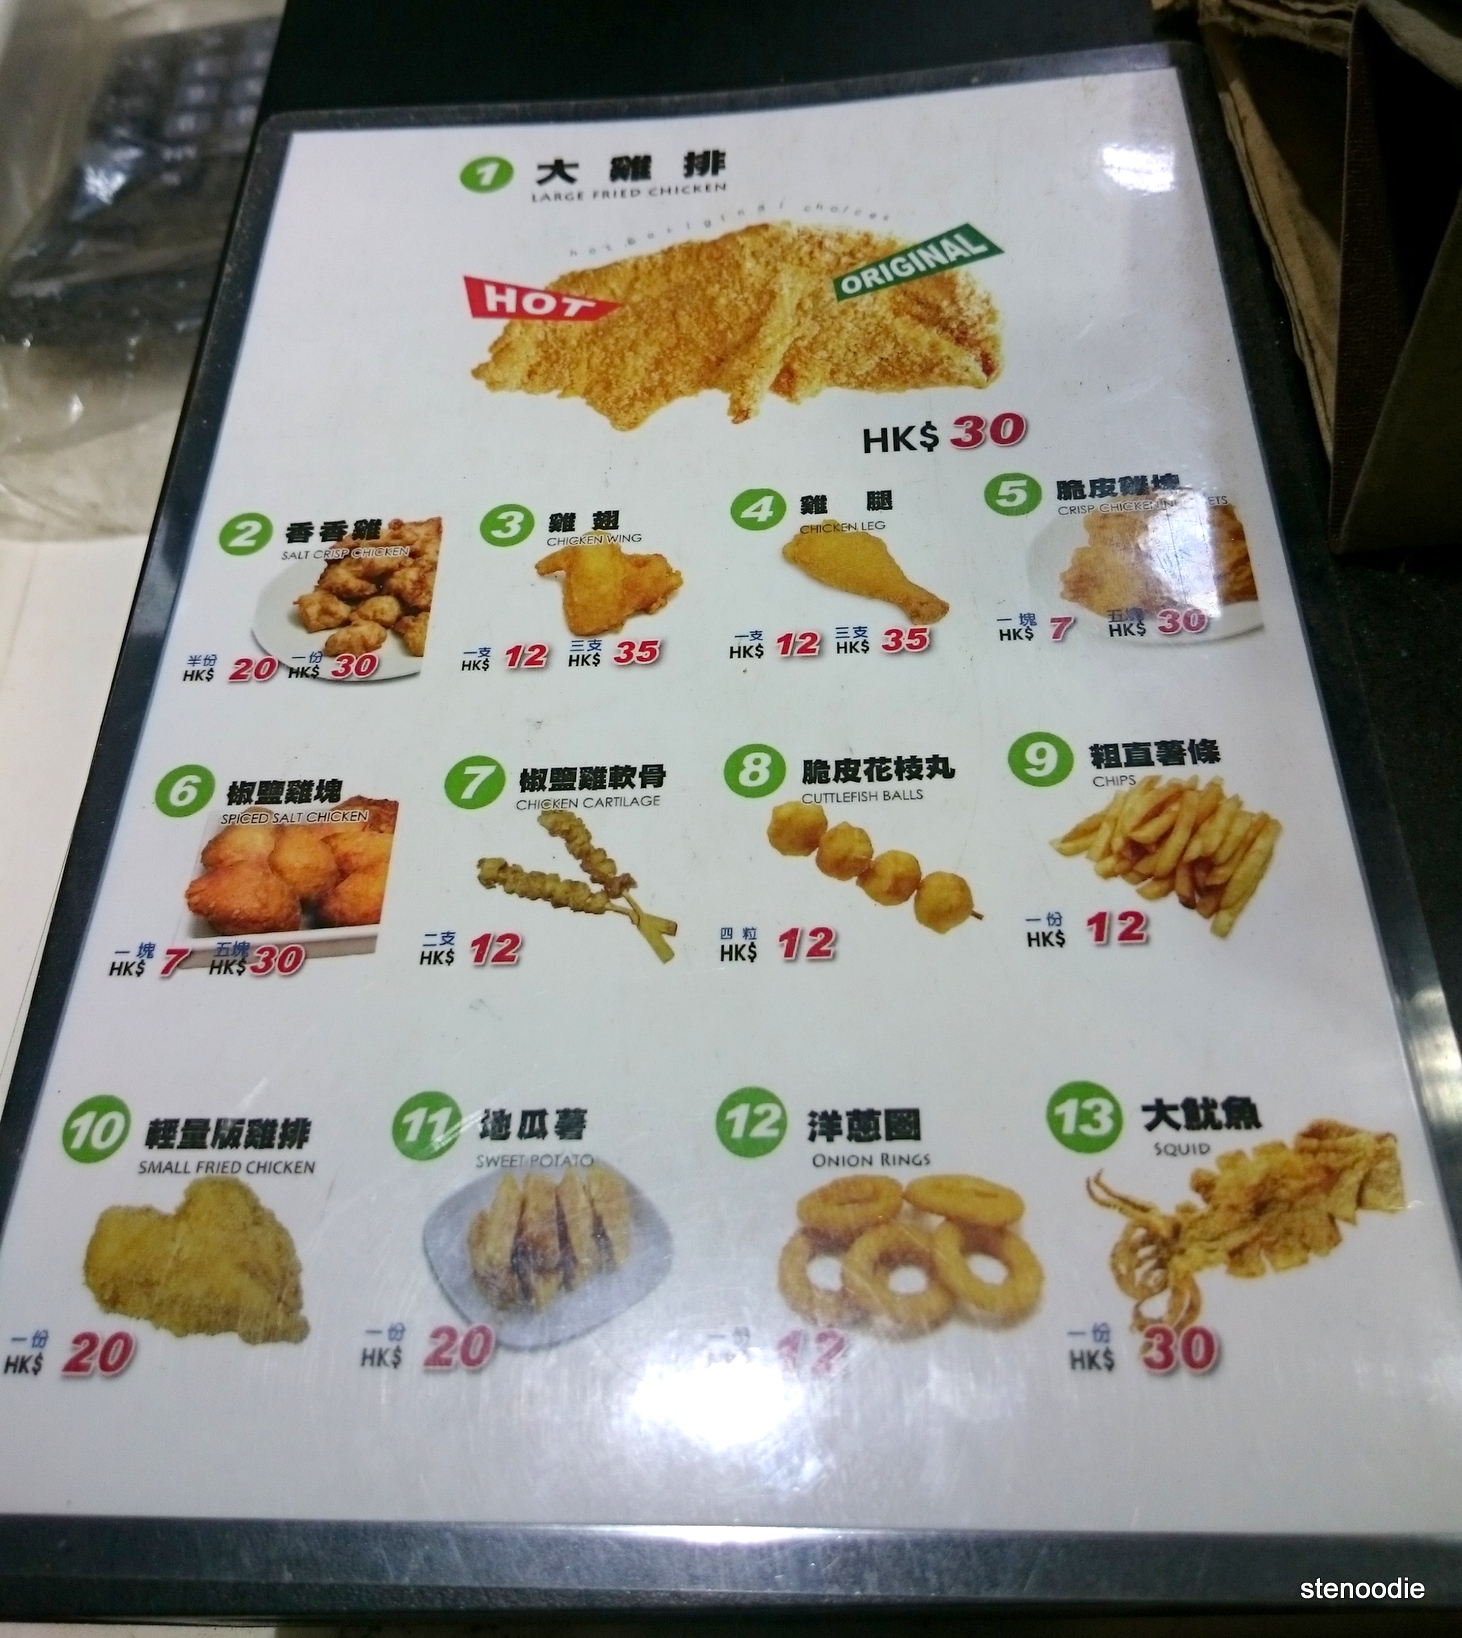 Hot Star Large Fried Chicken menu and prices